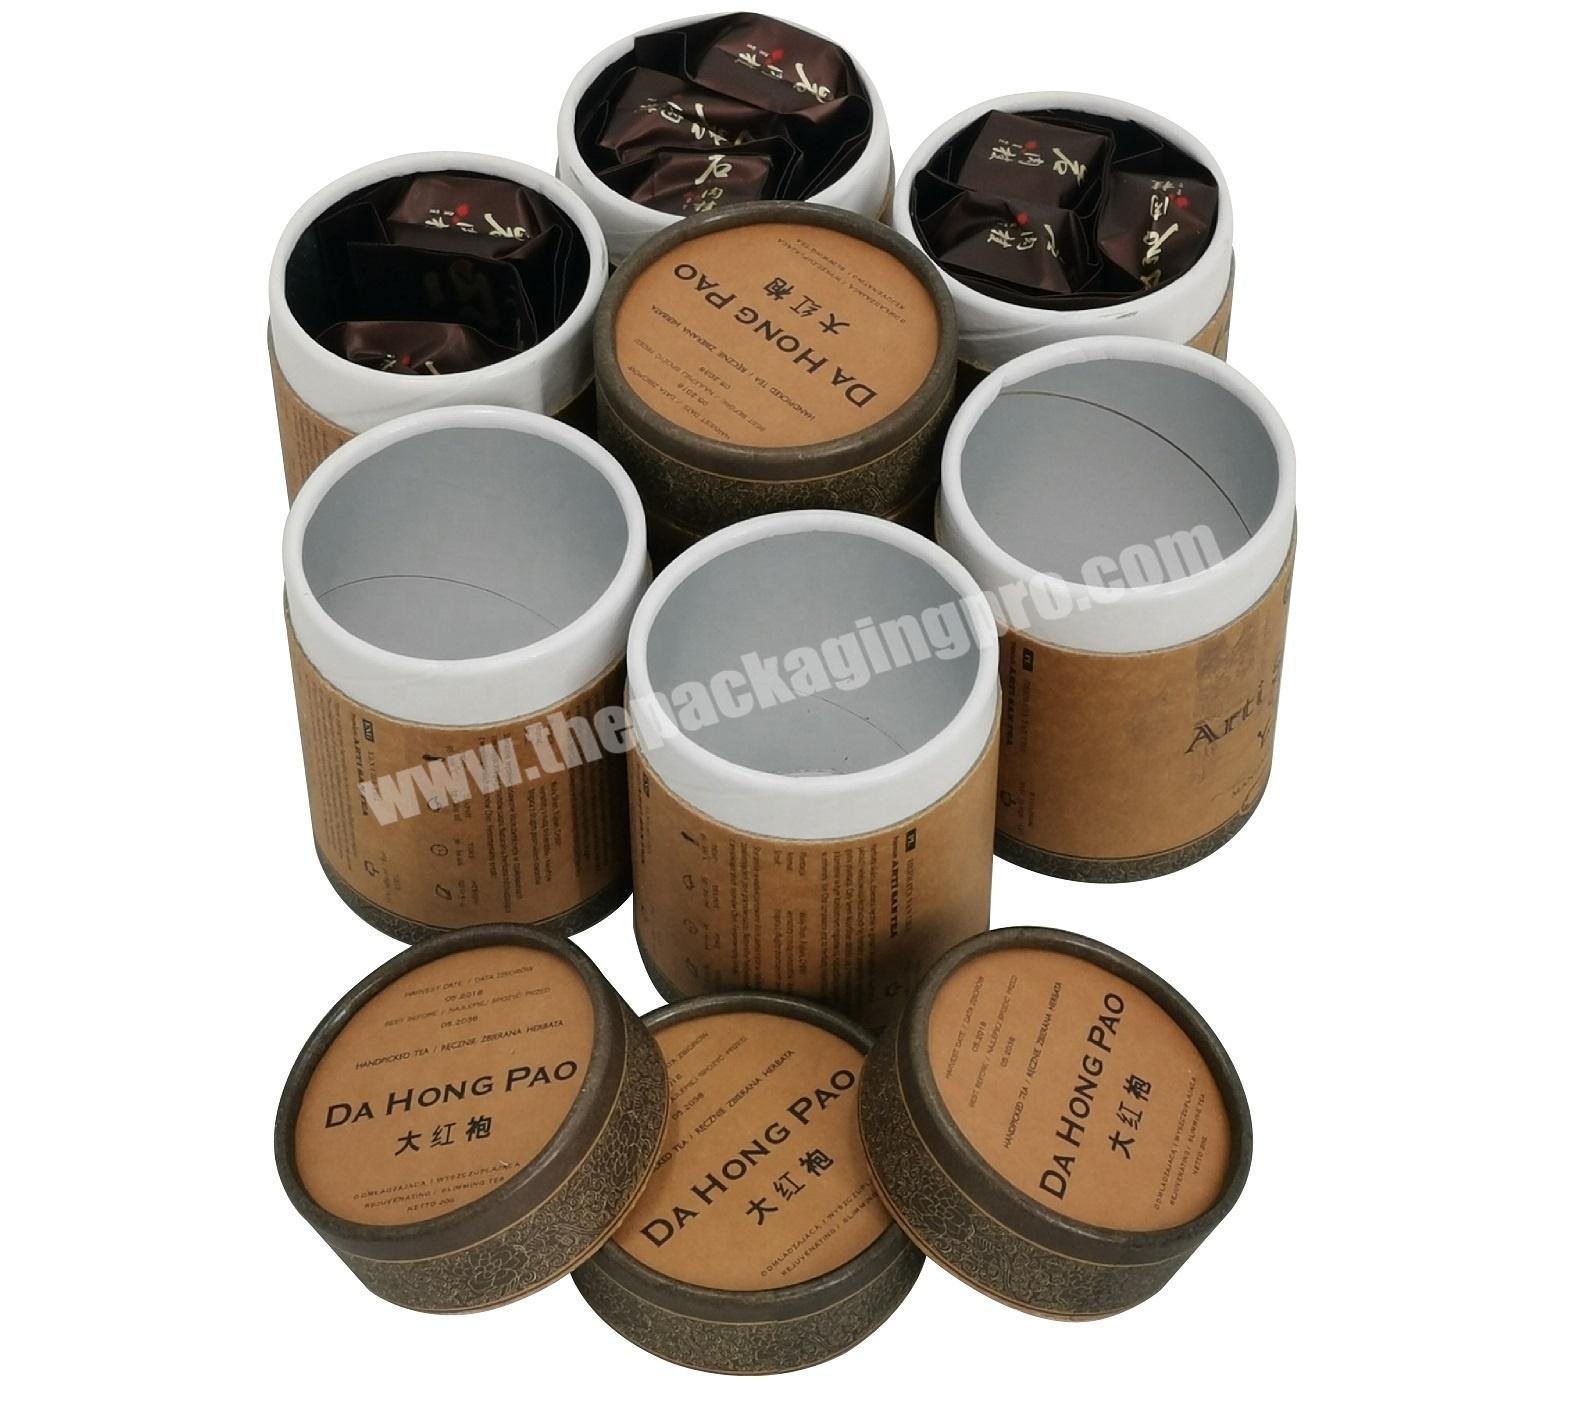 Food Grade Aluminum Foil Liner Wuyi Rock Tea Da Hong Pao Packing Cylinder Canister Rolled Edge Paper Tube